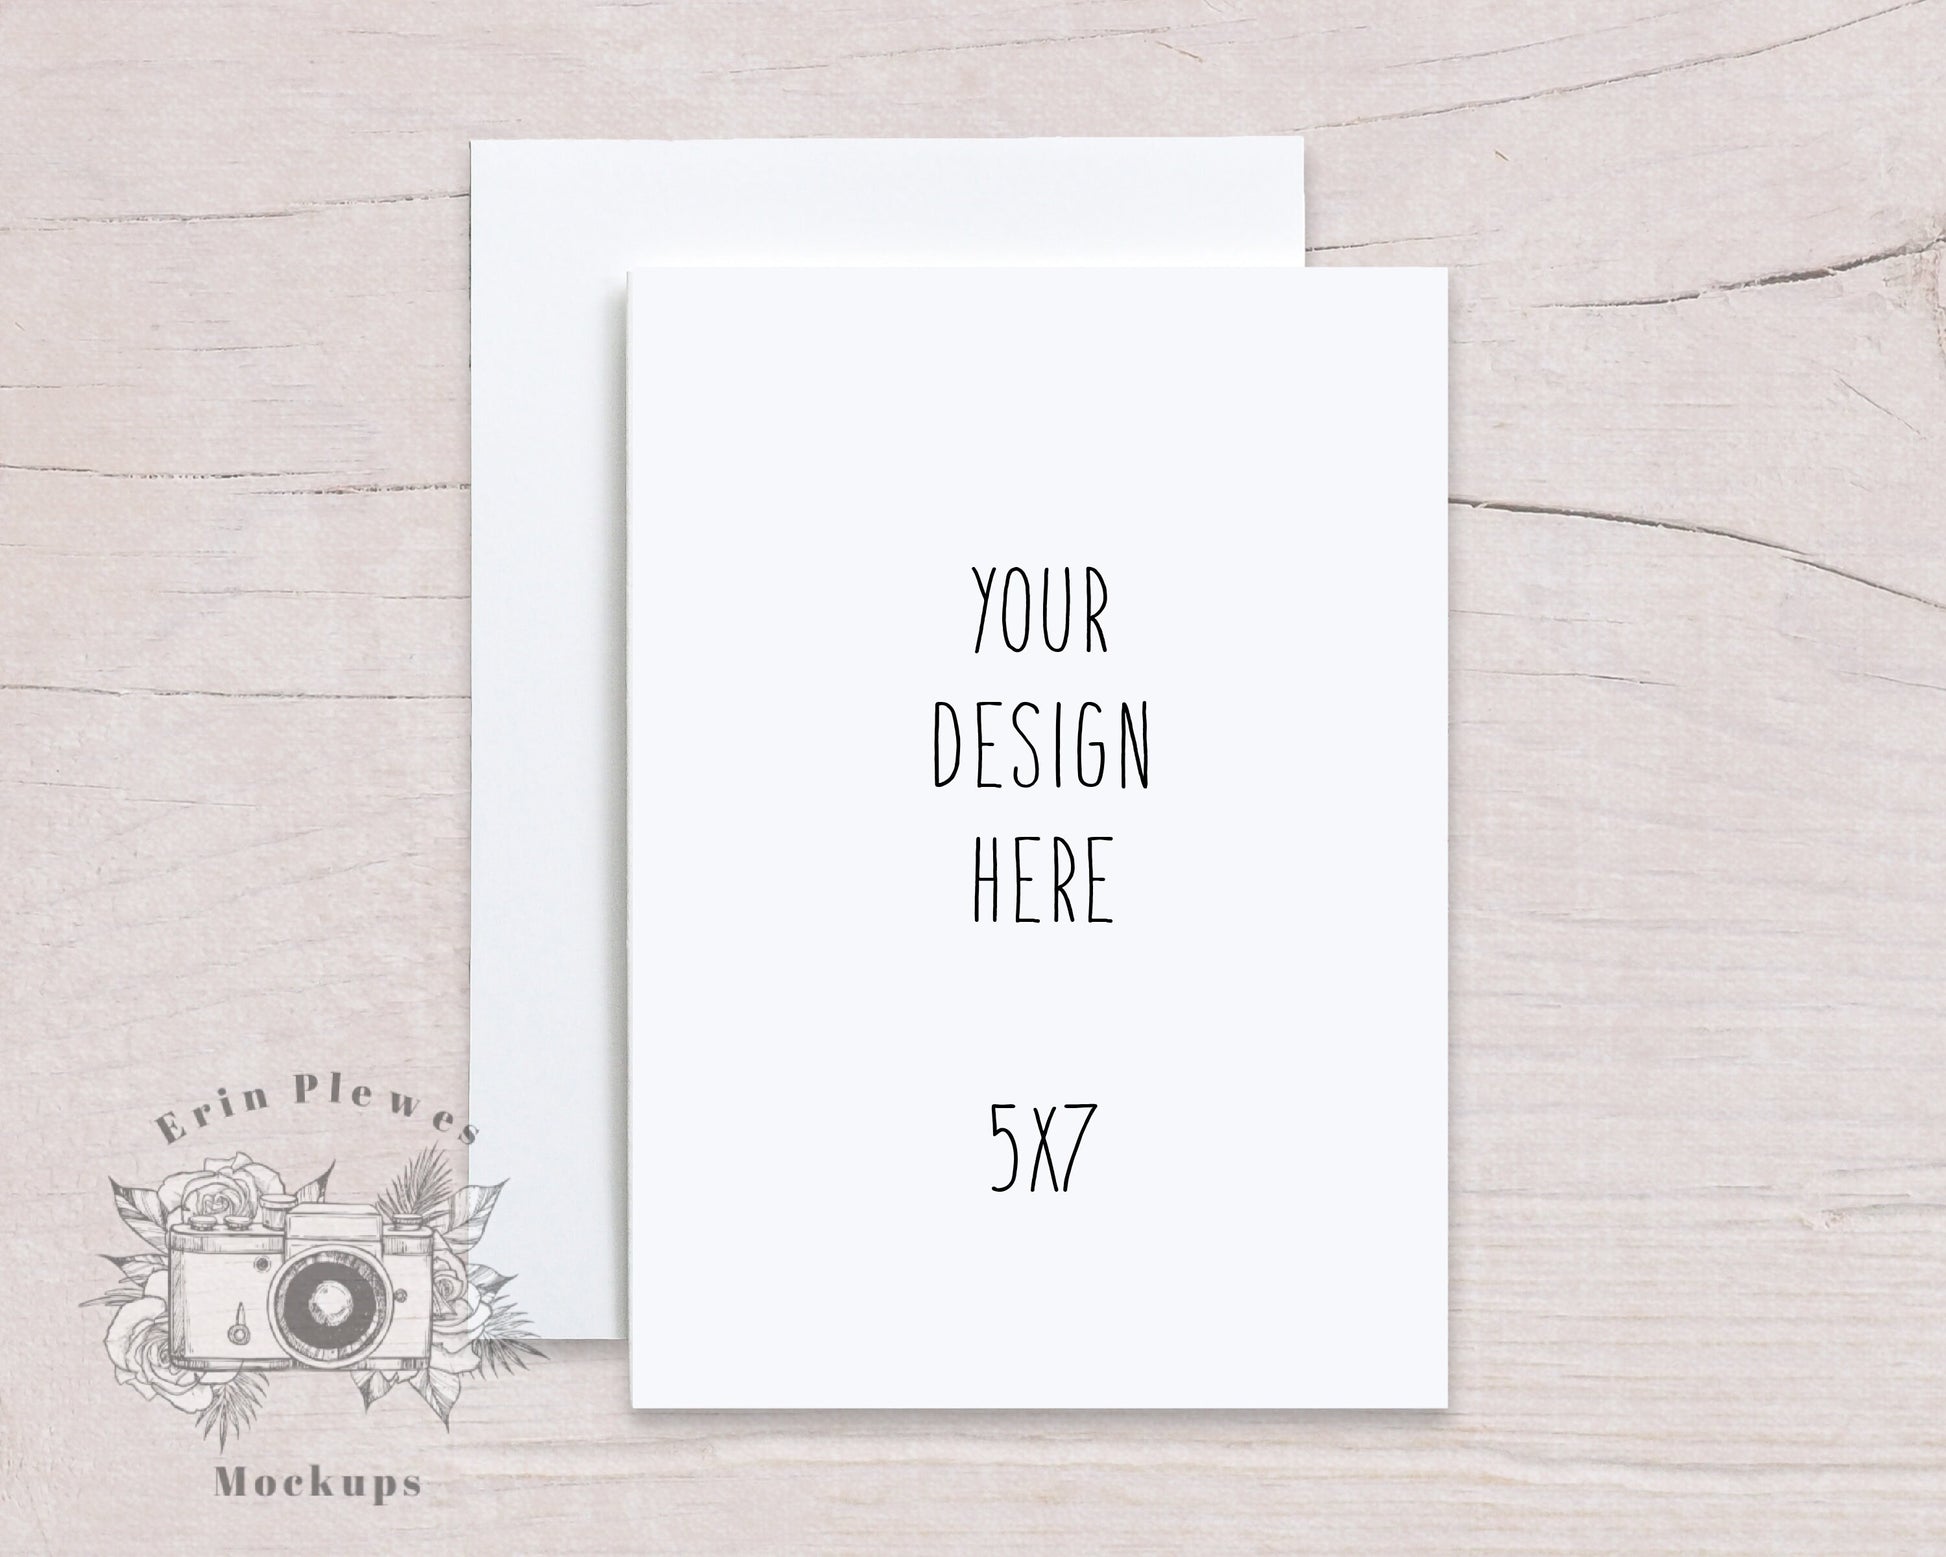 5x7 Card Mockup with White Envelope on Beige Wood, Thank You Card Mock Up, Invite Flat Lay for Rustic Wedding, Jpeg Instant Digital Download